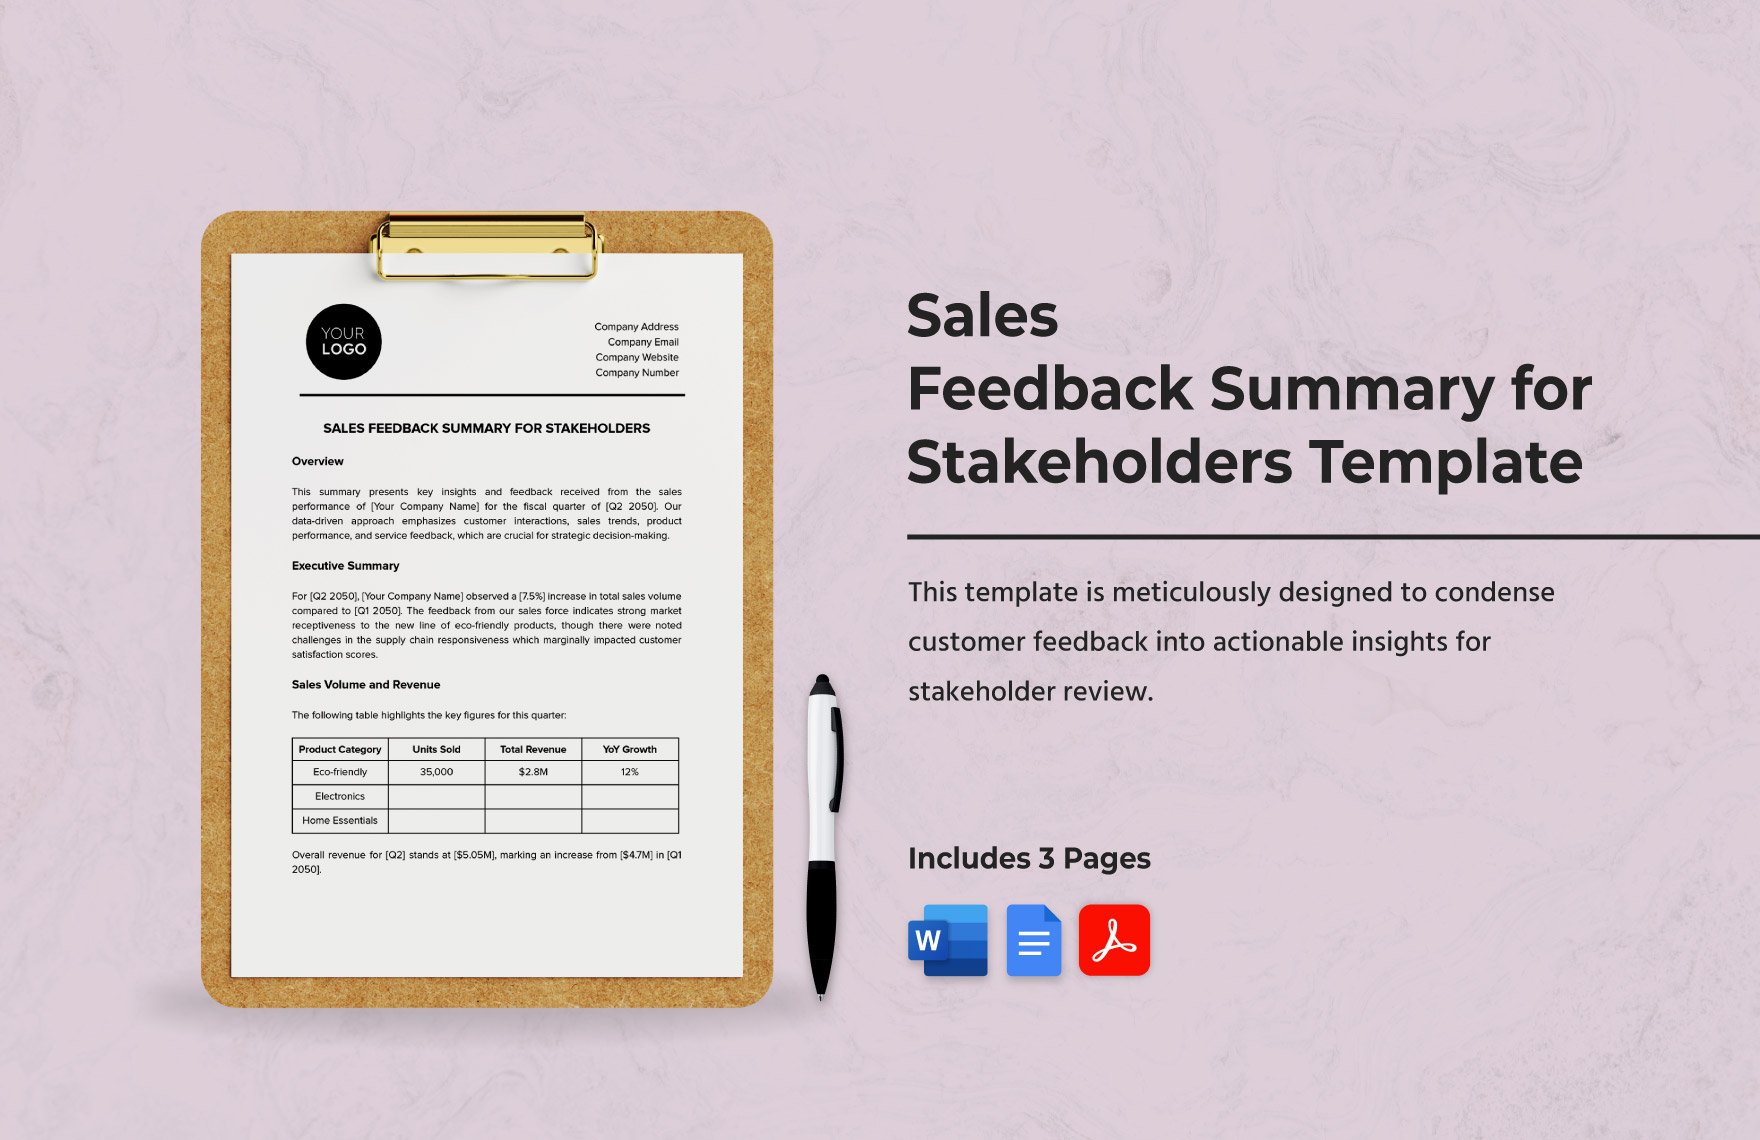 Sales Feedback Summary for Stakeholders Template